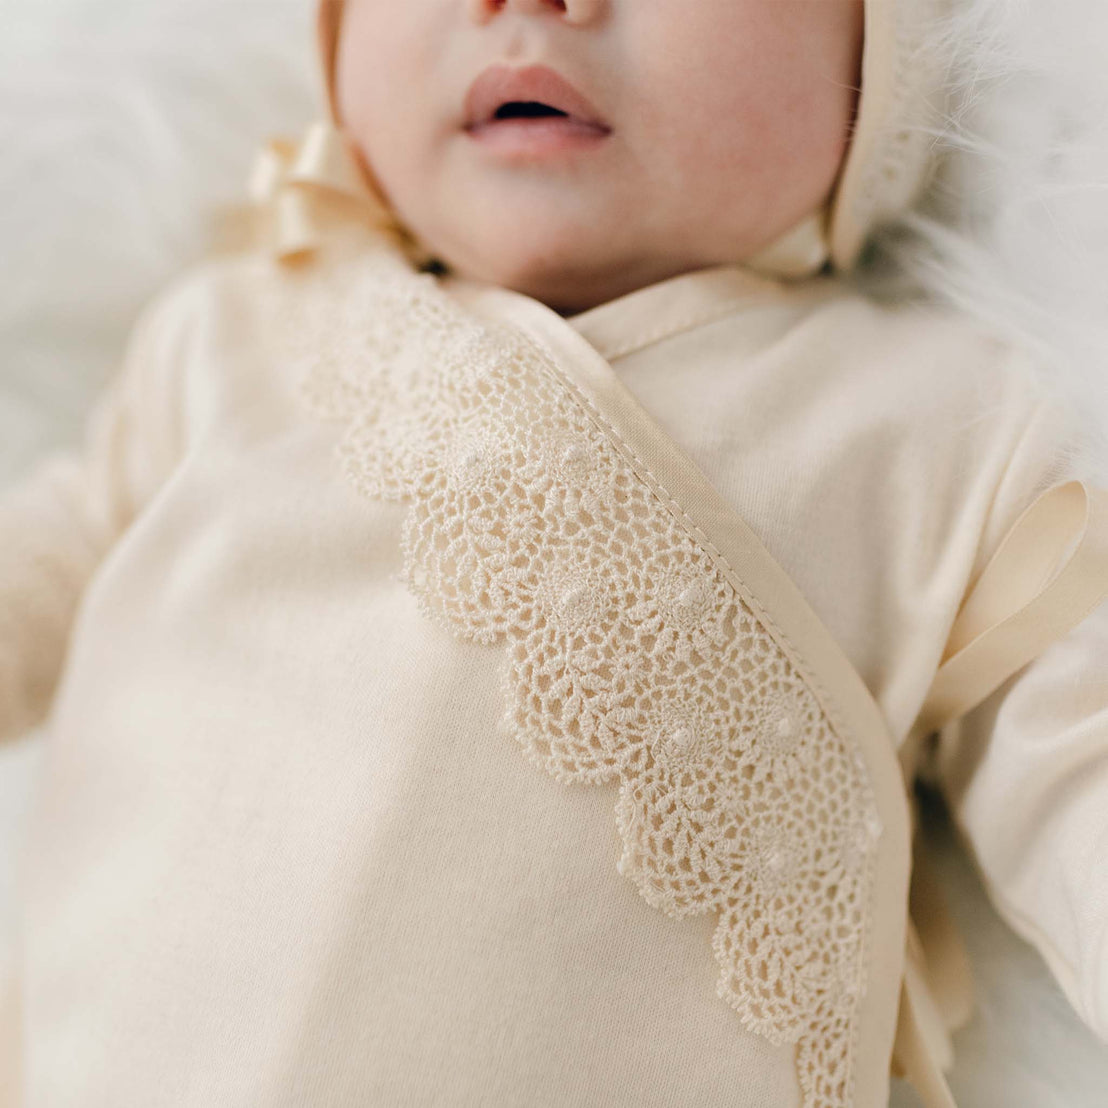 Close-up of a newborn girl wearing a Mia Knot Gown & Bonnet. The photo focuses on the layette gown's details and the delicate lace embroidery across the chest.